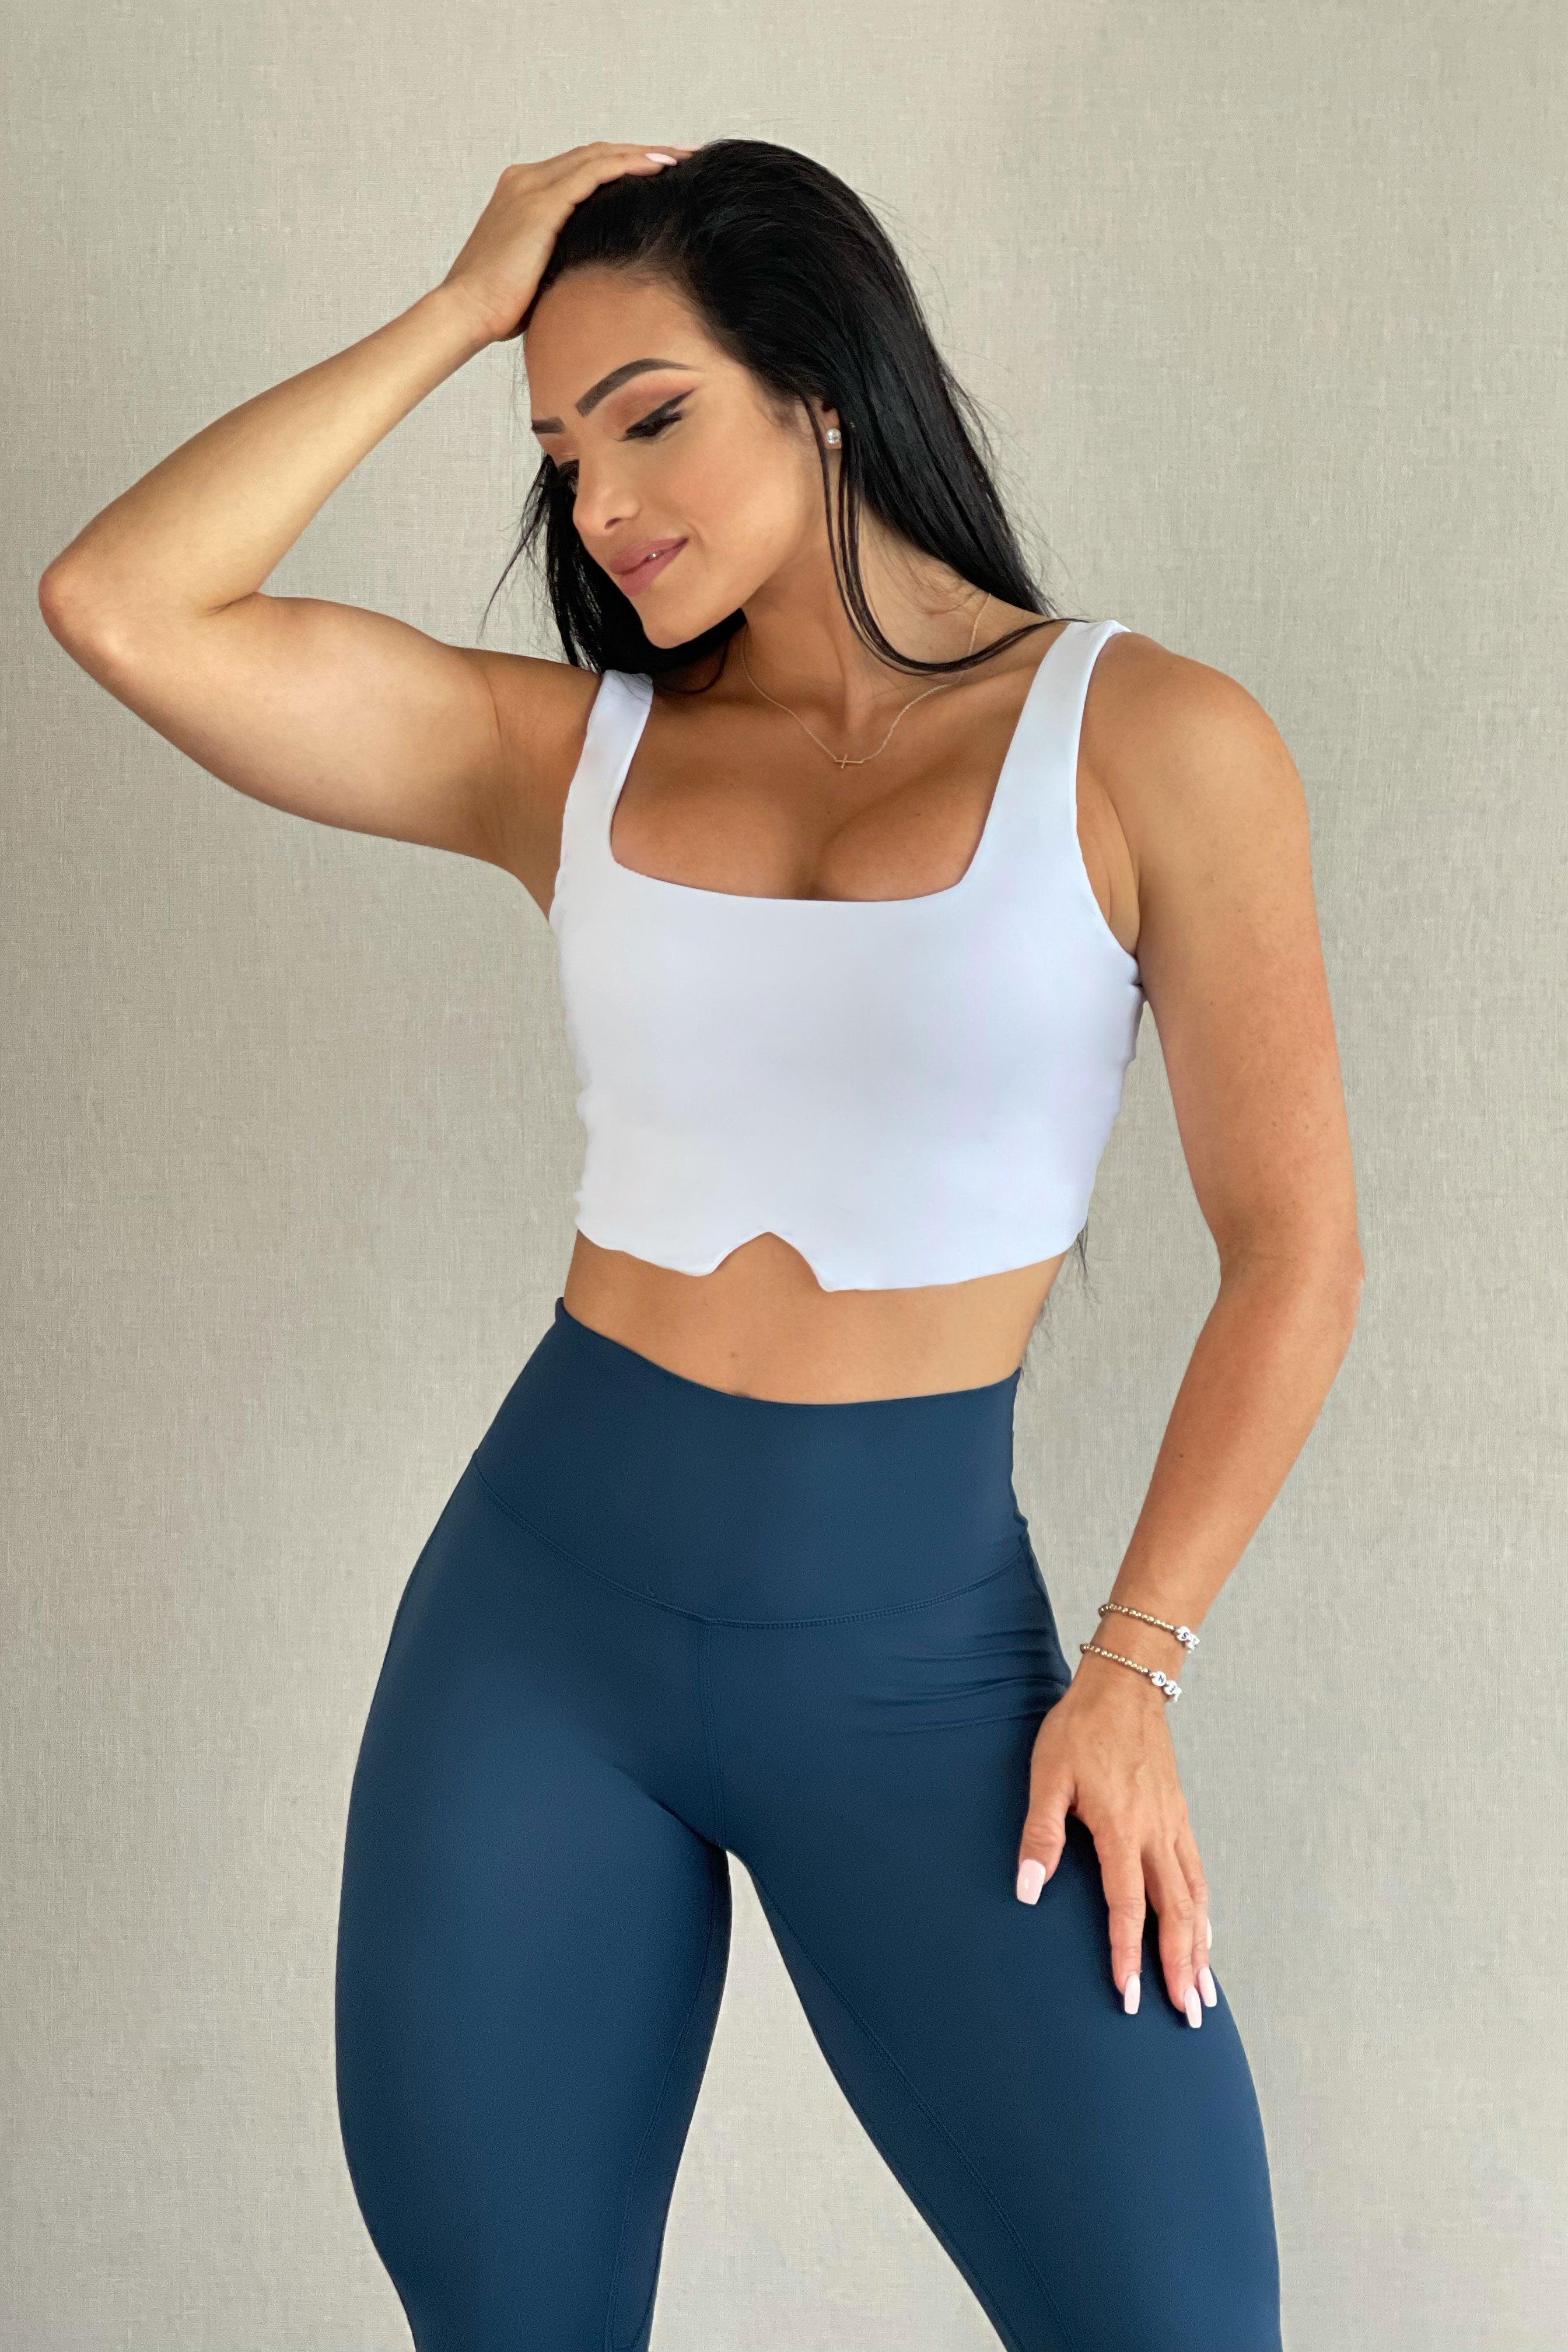 Reign Padded Crop Top - White - Jed North Canada